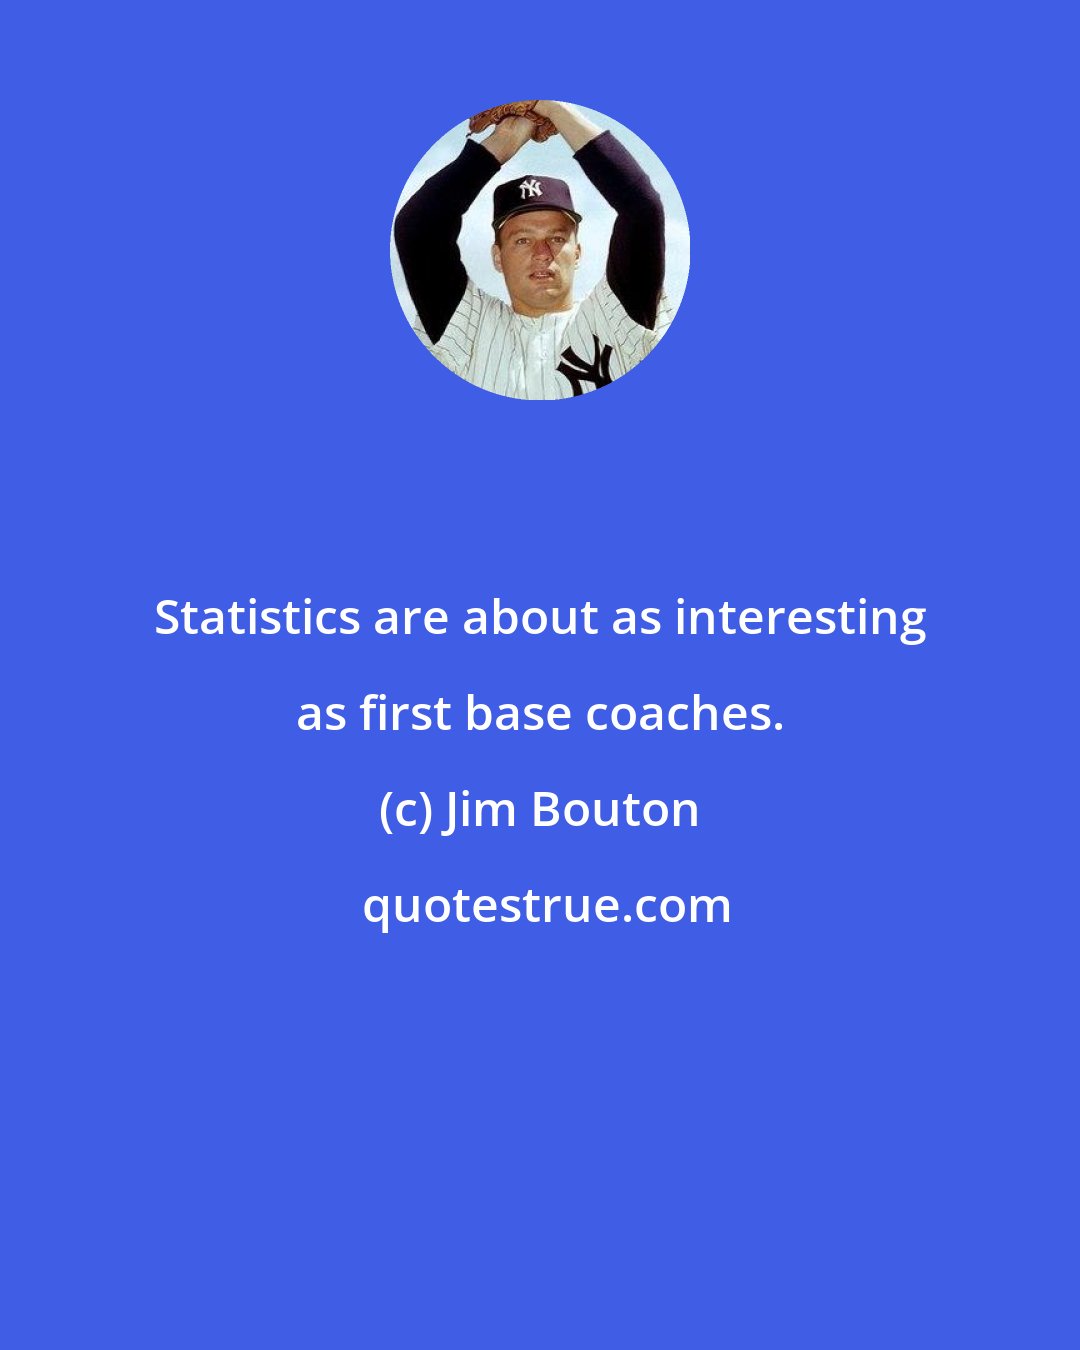 Jim Bouton: Statistics are about as interesting as first base coaches.